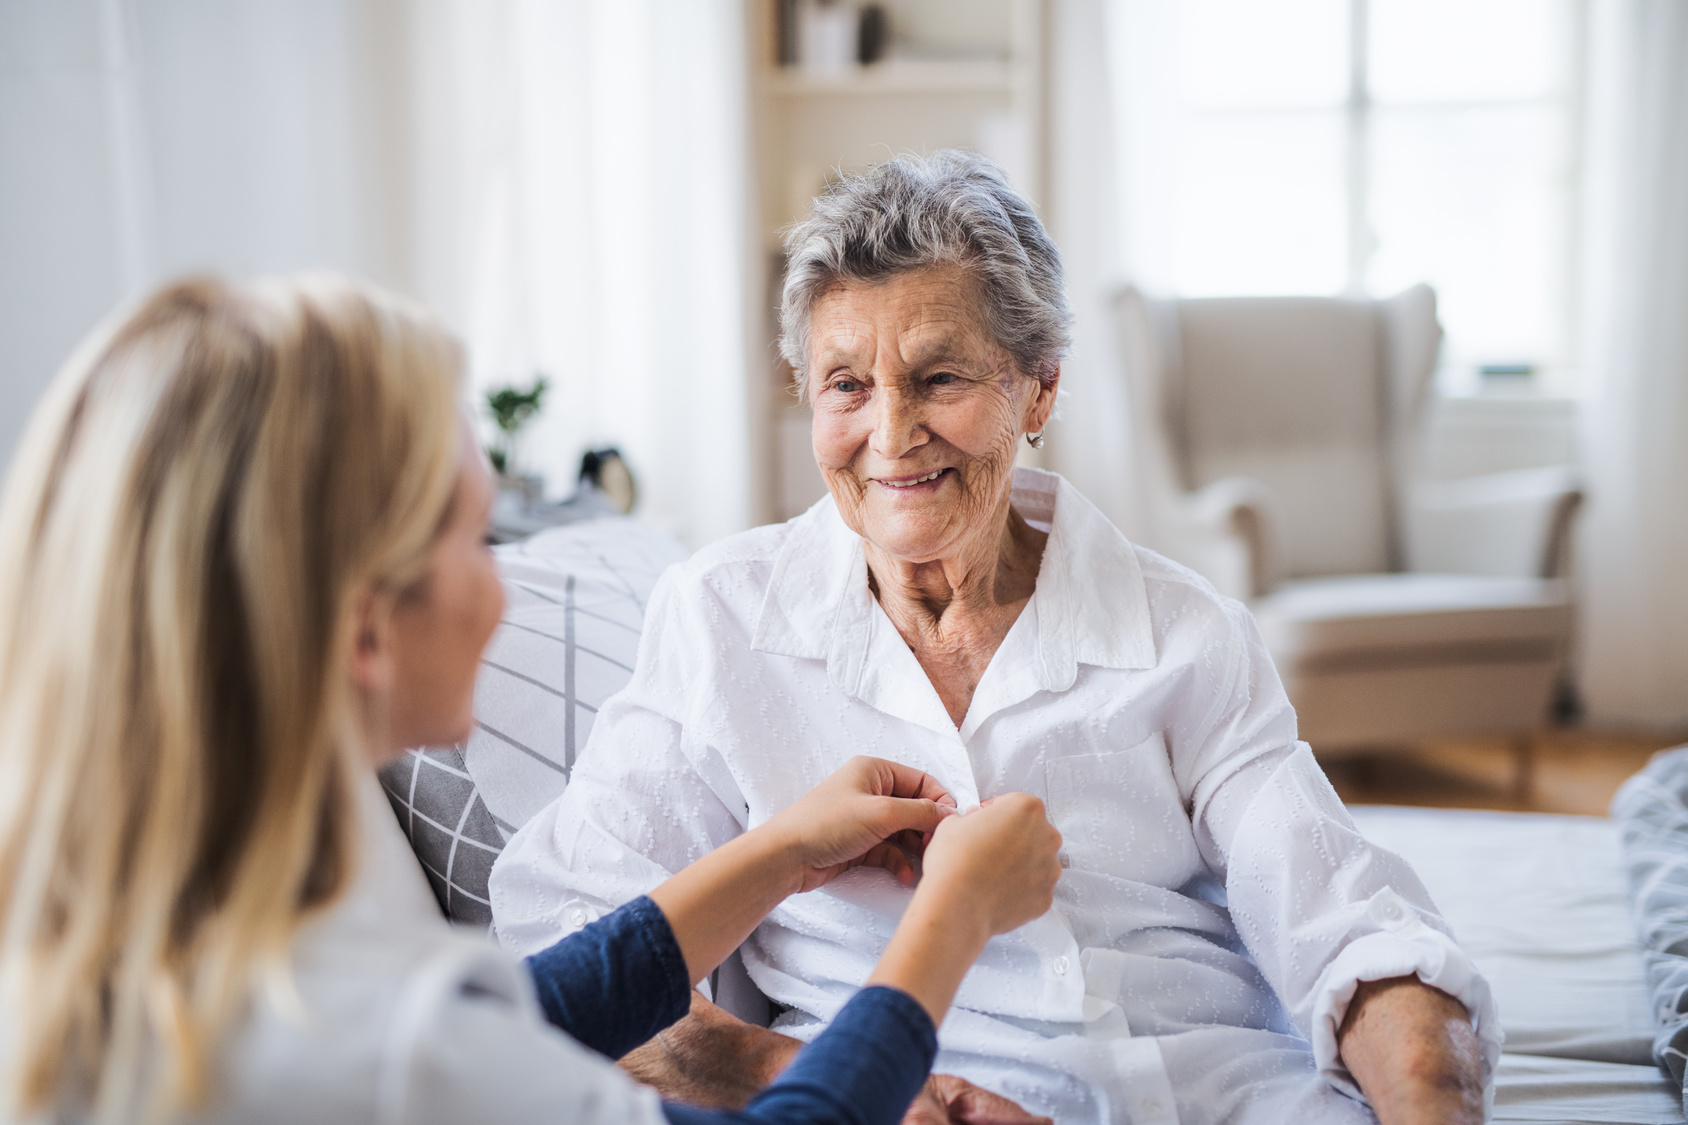 home-care-assistance-with-adls-in-hinsdale-downers-grove-dupage-county-il